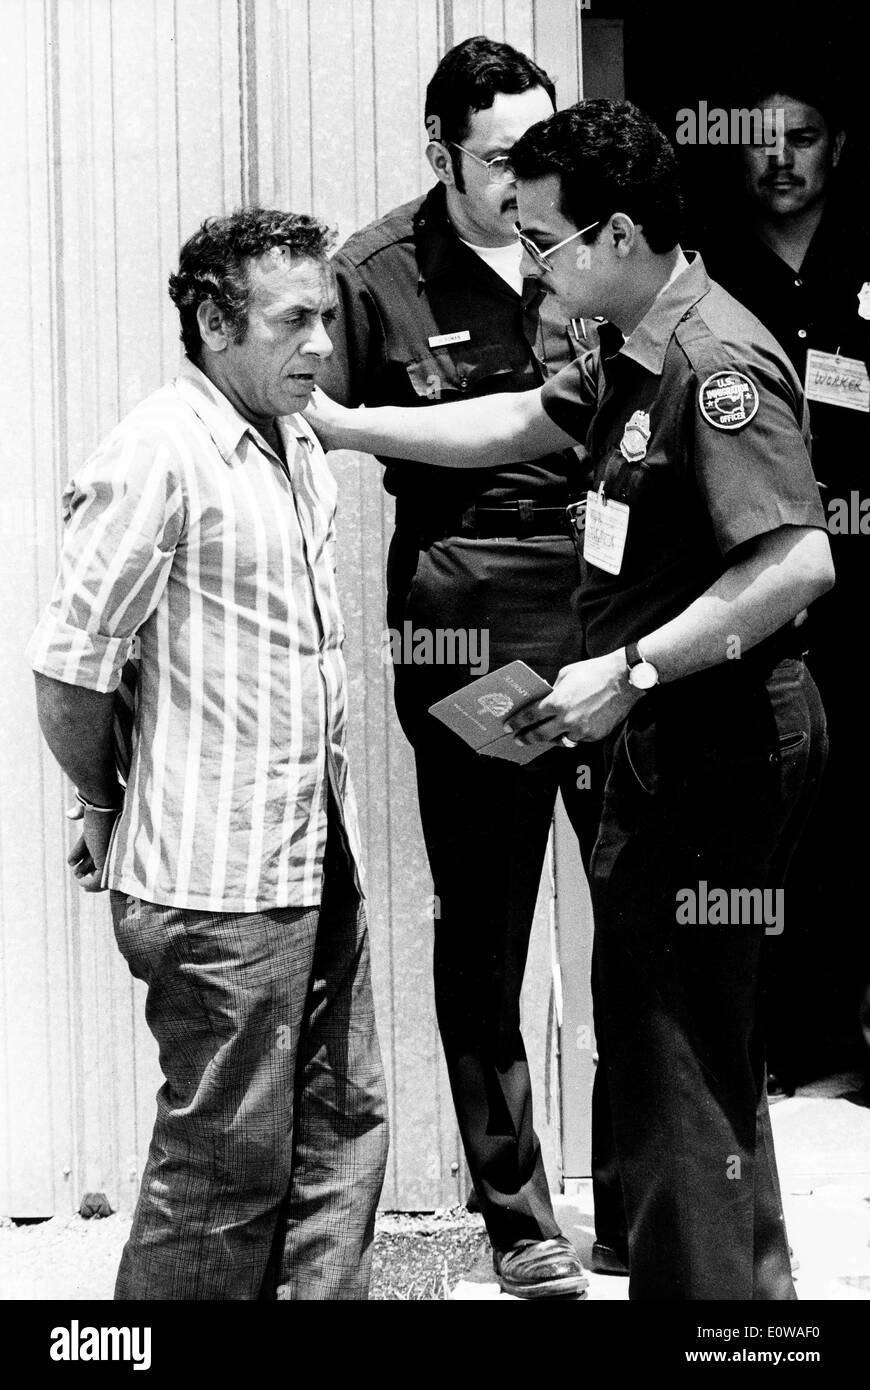 Cuban Refugee talks to officials while handcuffed Stock Photo